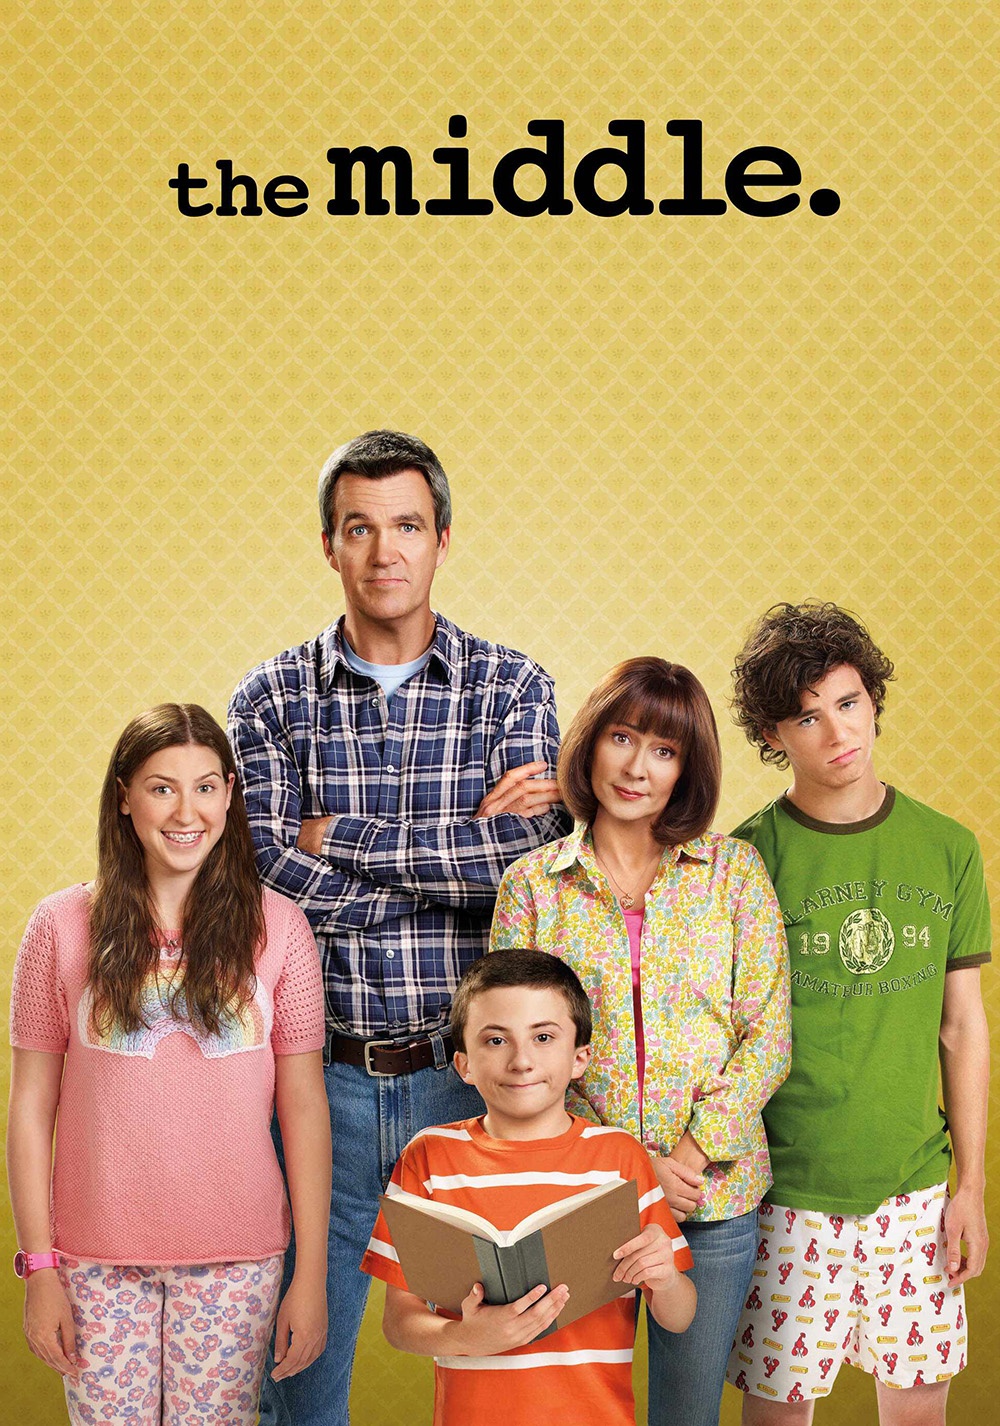 Why American Sitcom “The Middle” is One of the Best Family Comedies Ever 7